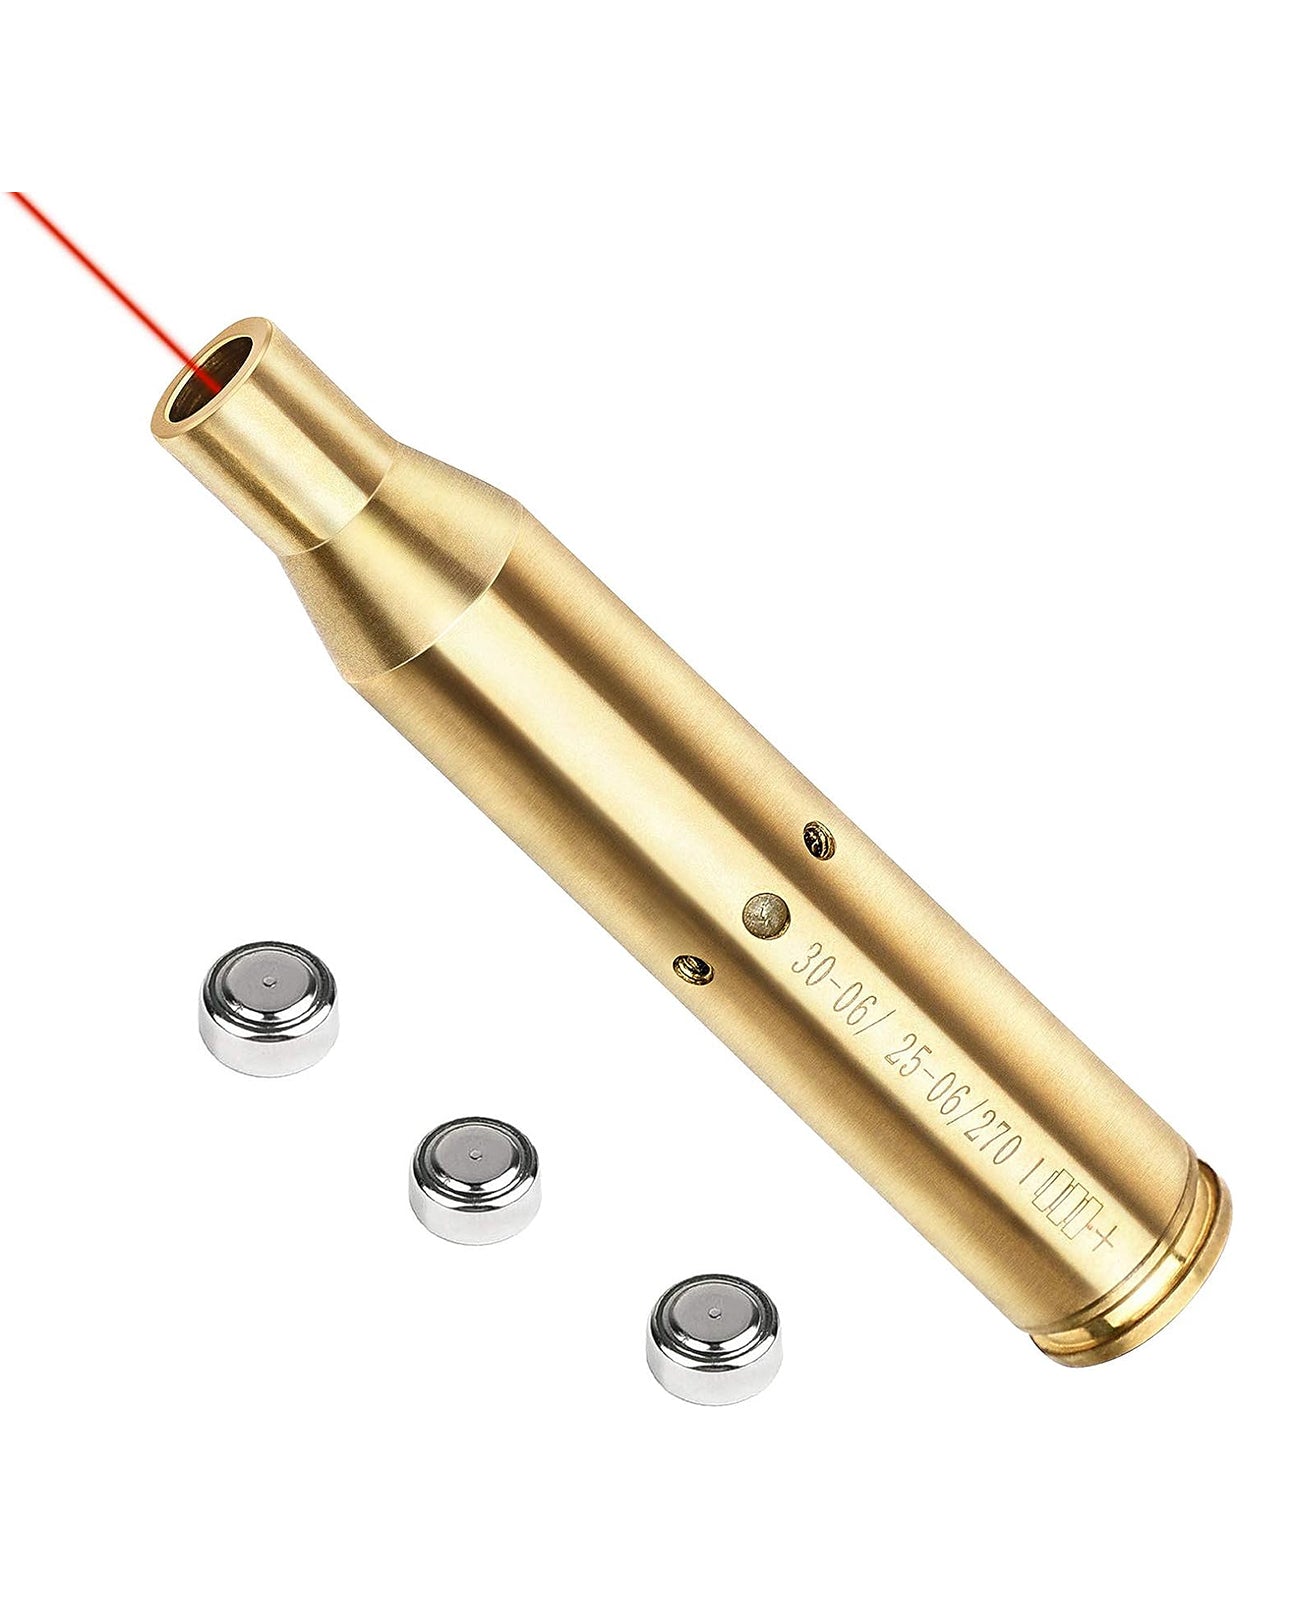 Red Laser Bore Sight with 3 Batteries